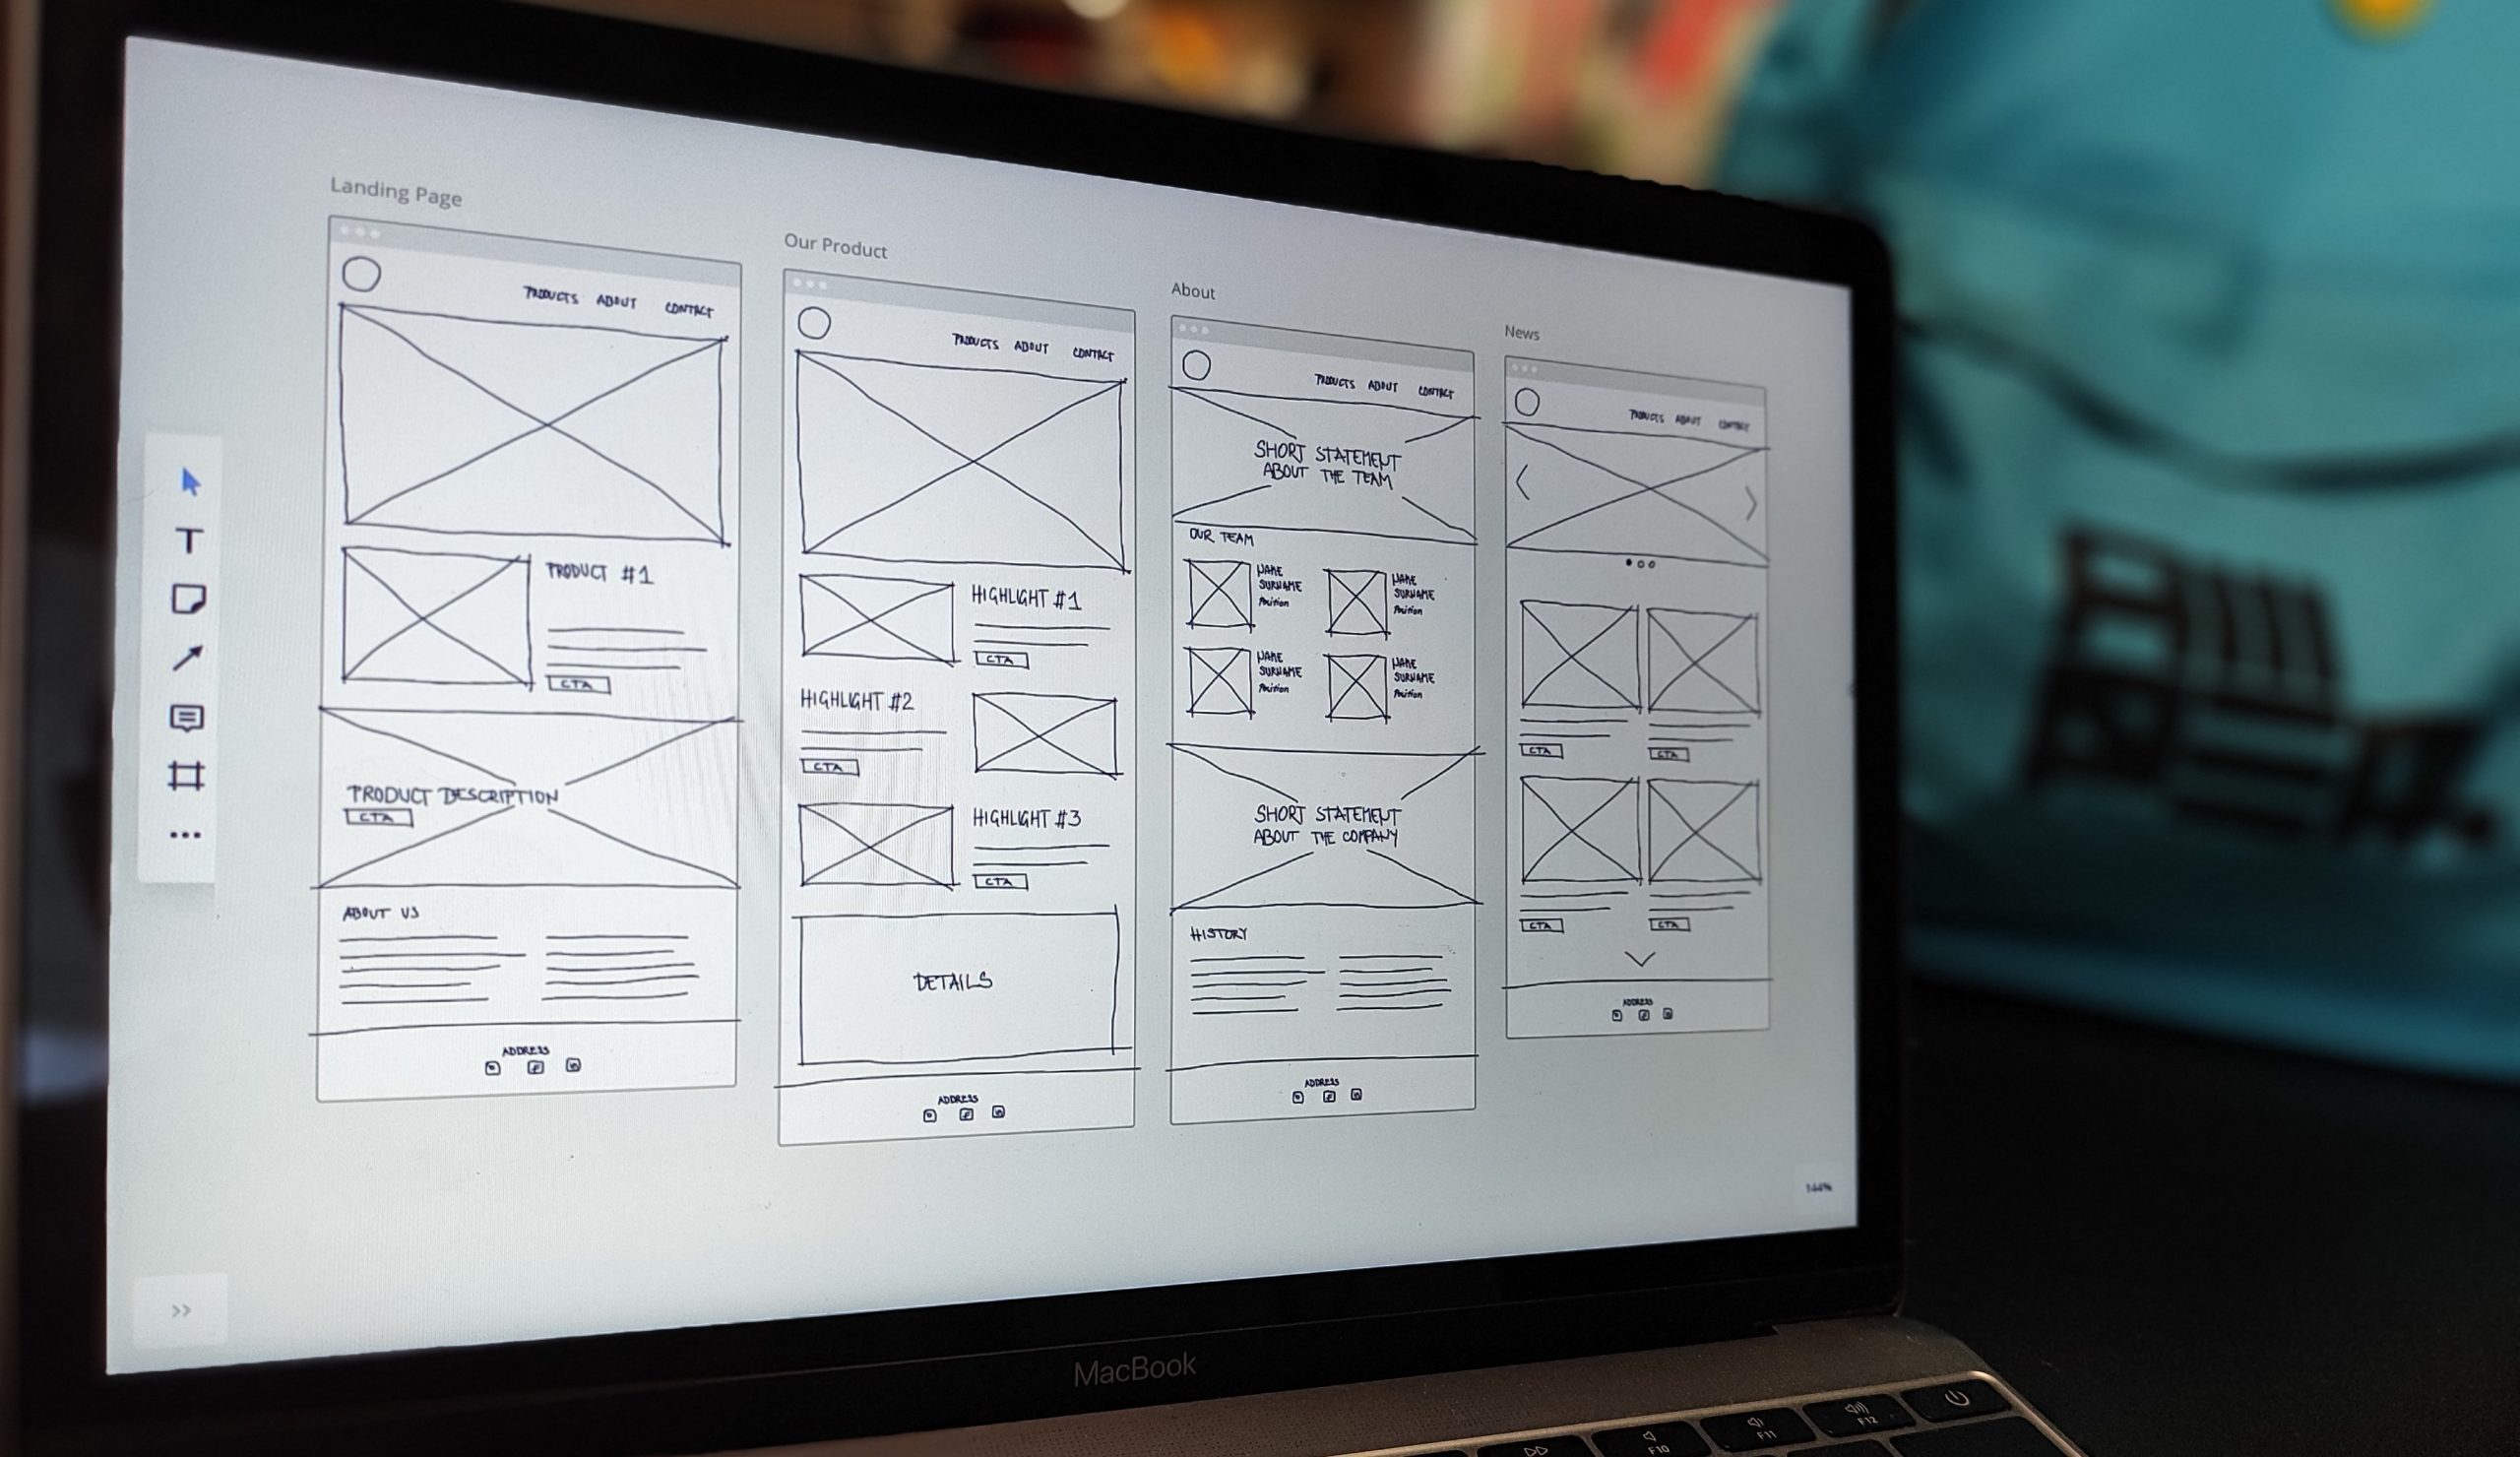 Website wireframe displayed on a laptop.